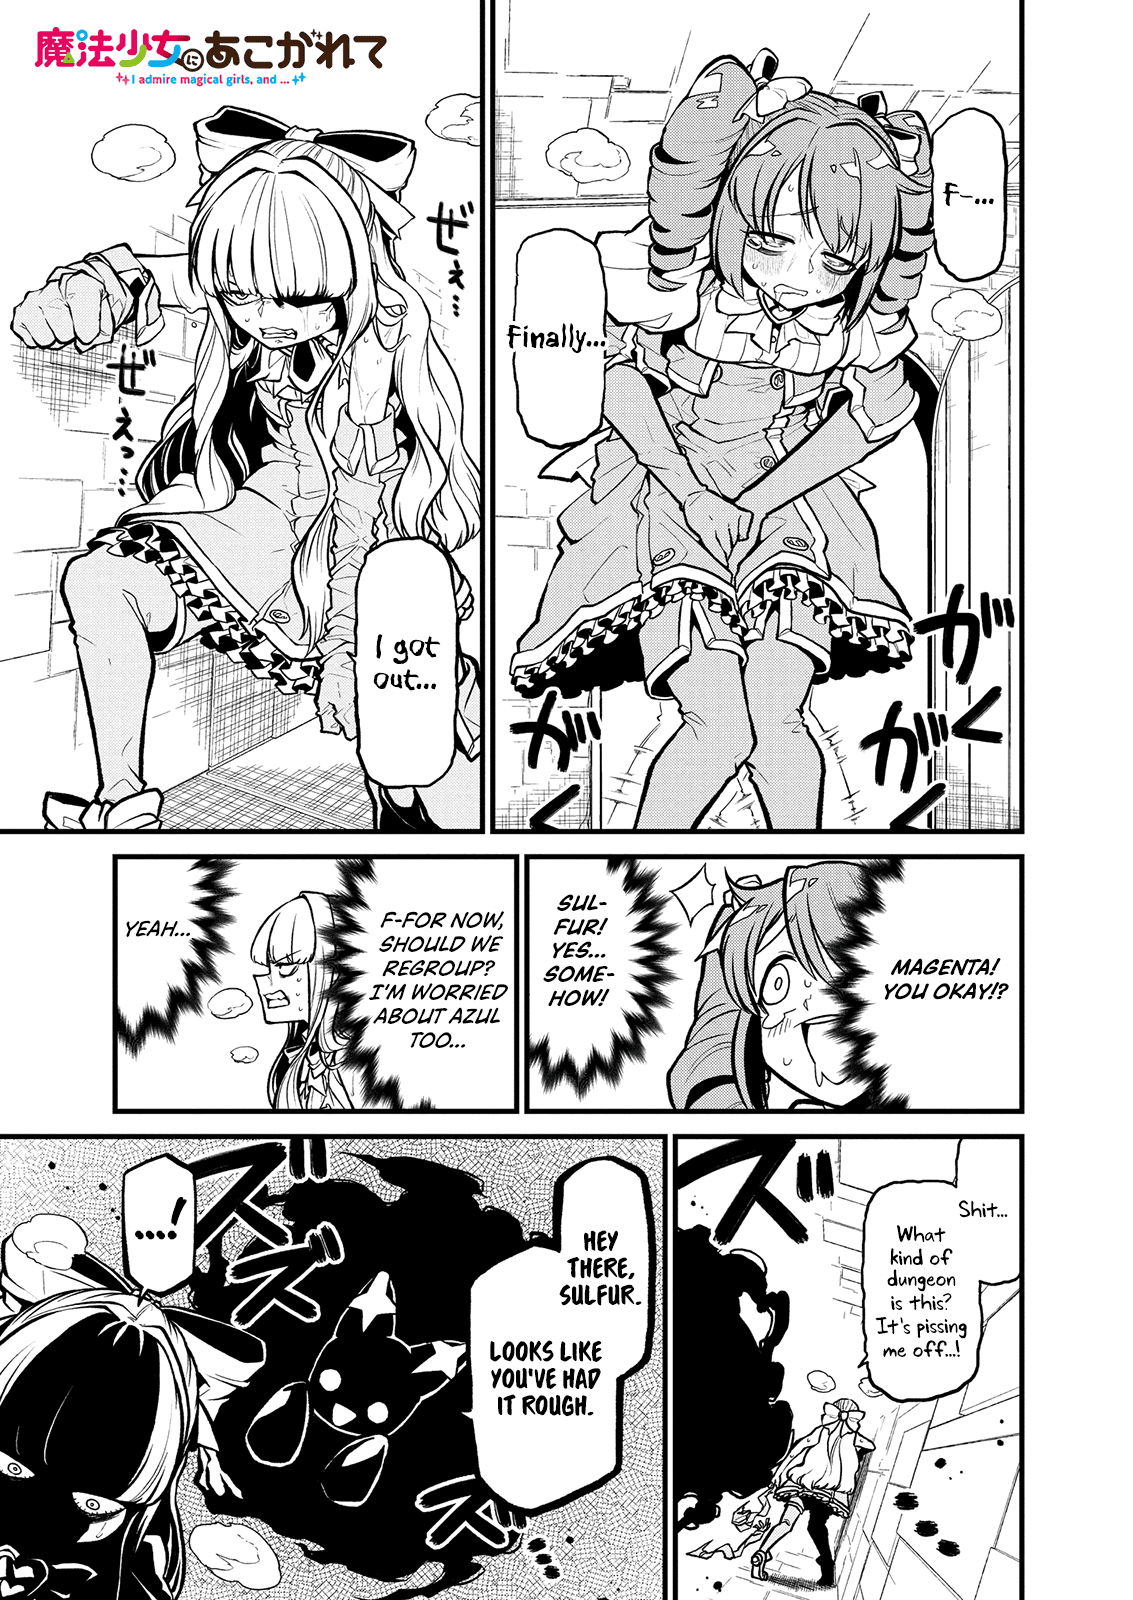 Looking Up To Magical Girls - Page 1